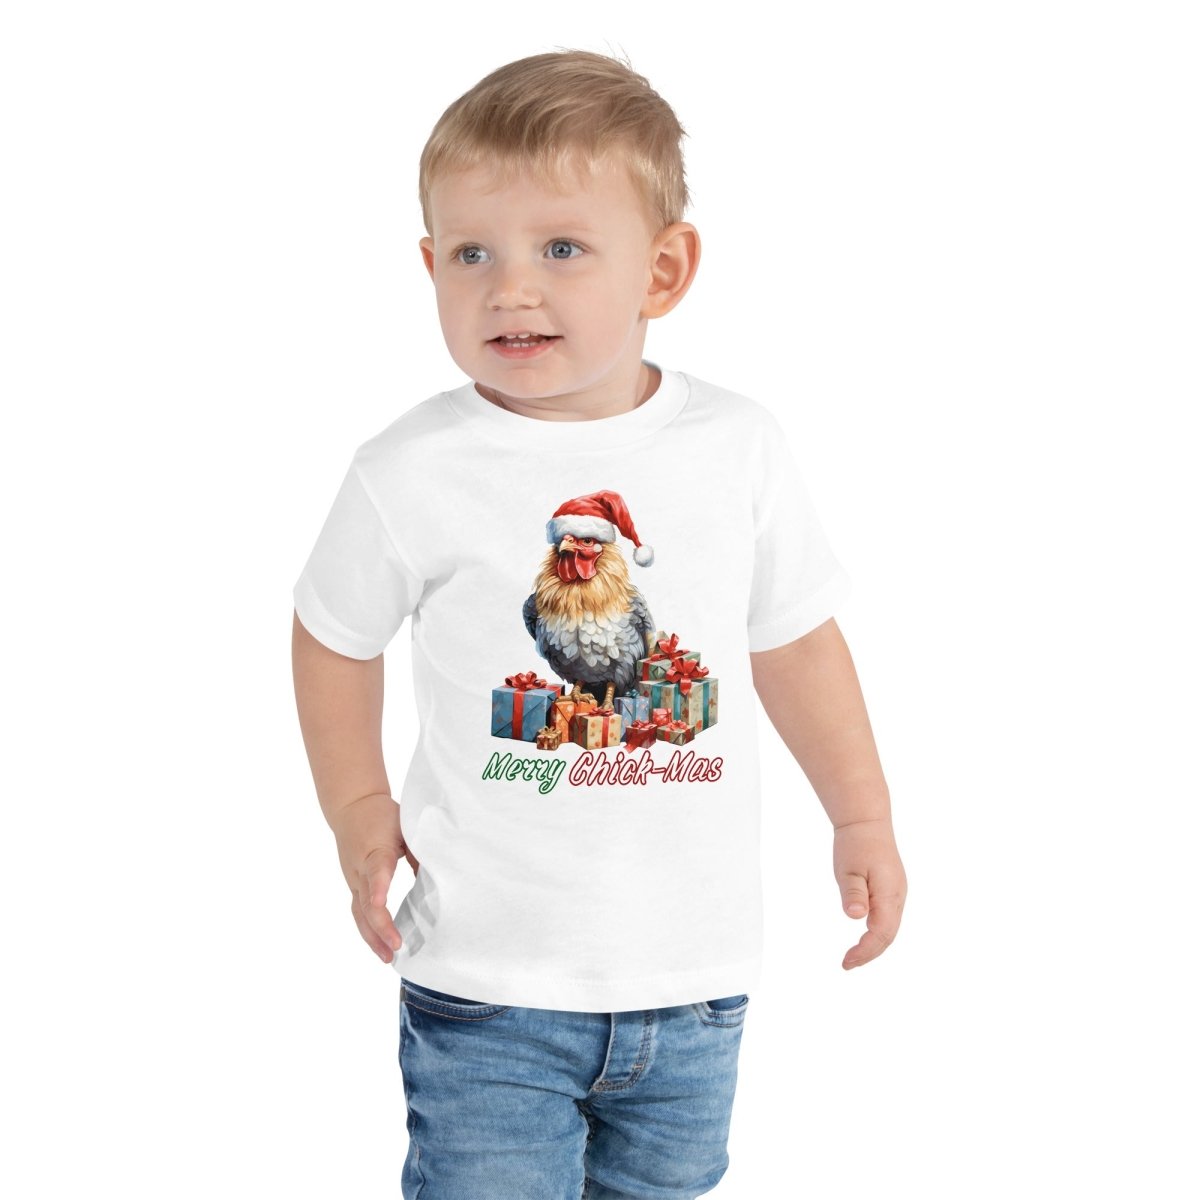 Christmas Chicken T-Shirt - High Quality Festive Children T-Shirt, Gift for Chicken Lovers, Funny Farm Animal Toddler Xmas Shirt - Everything Pixel